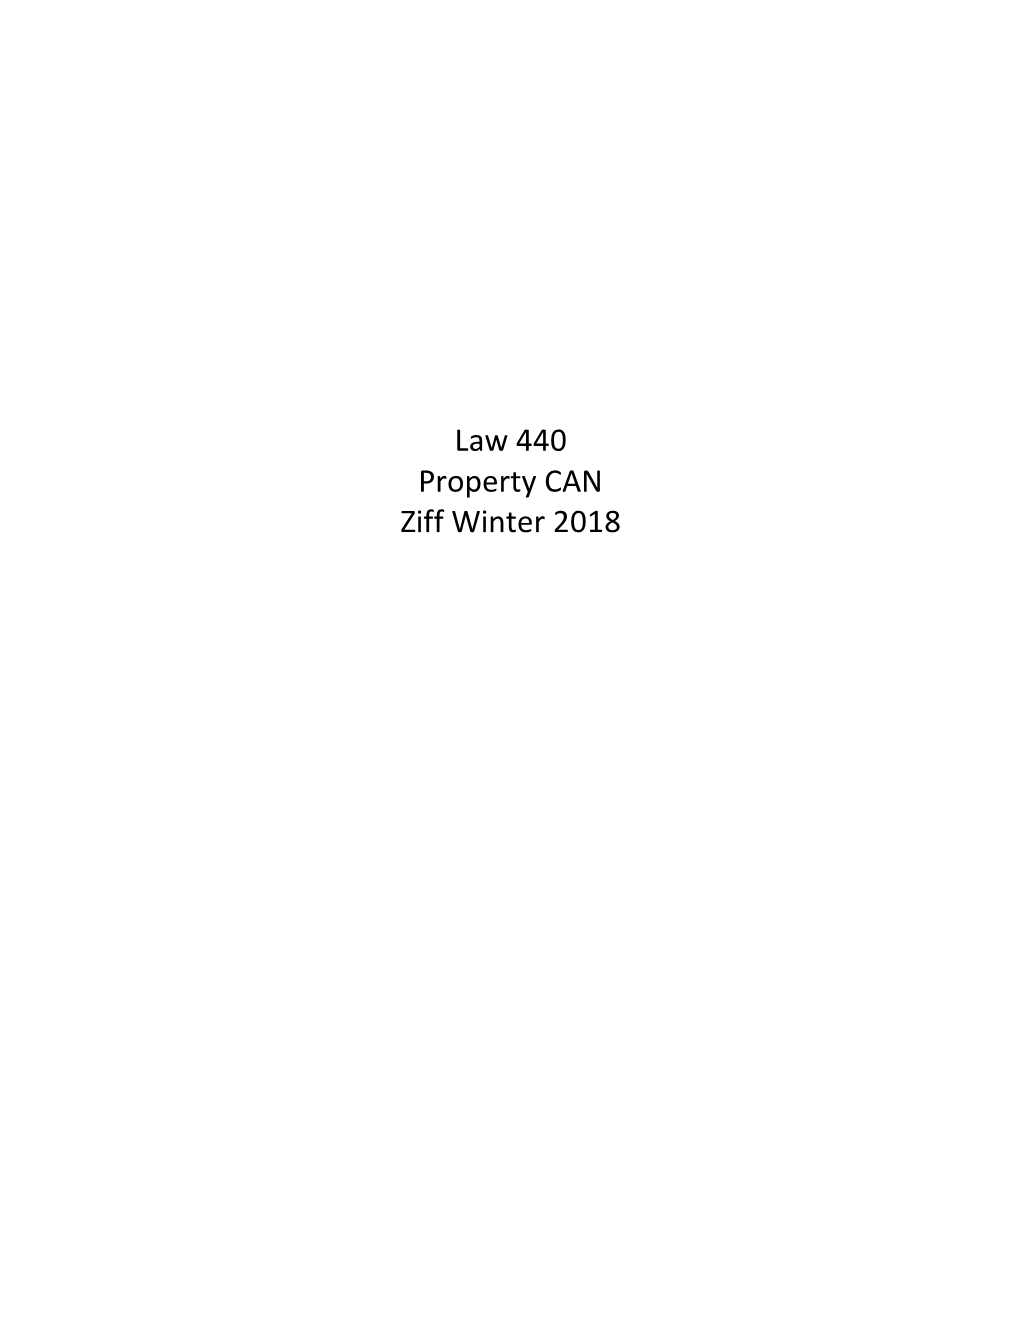 Law 440 Property CAN Ziff Winter 2018